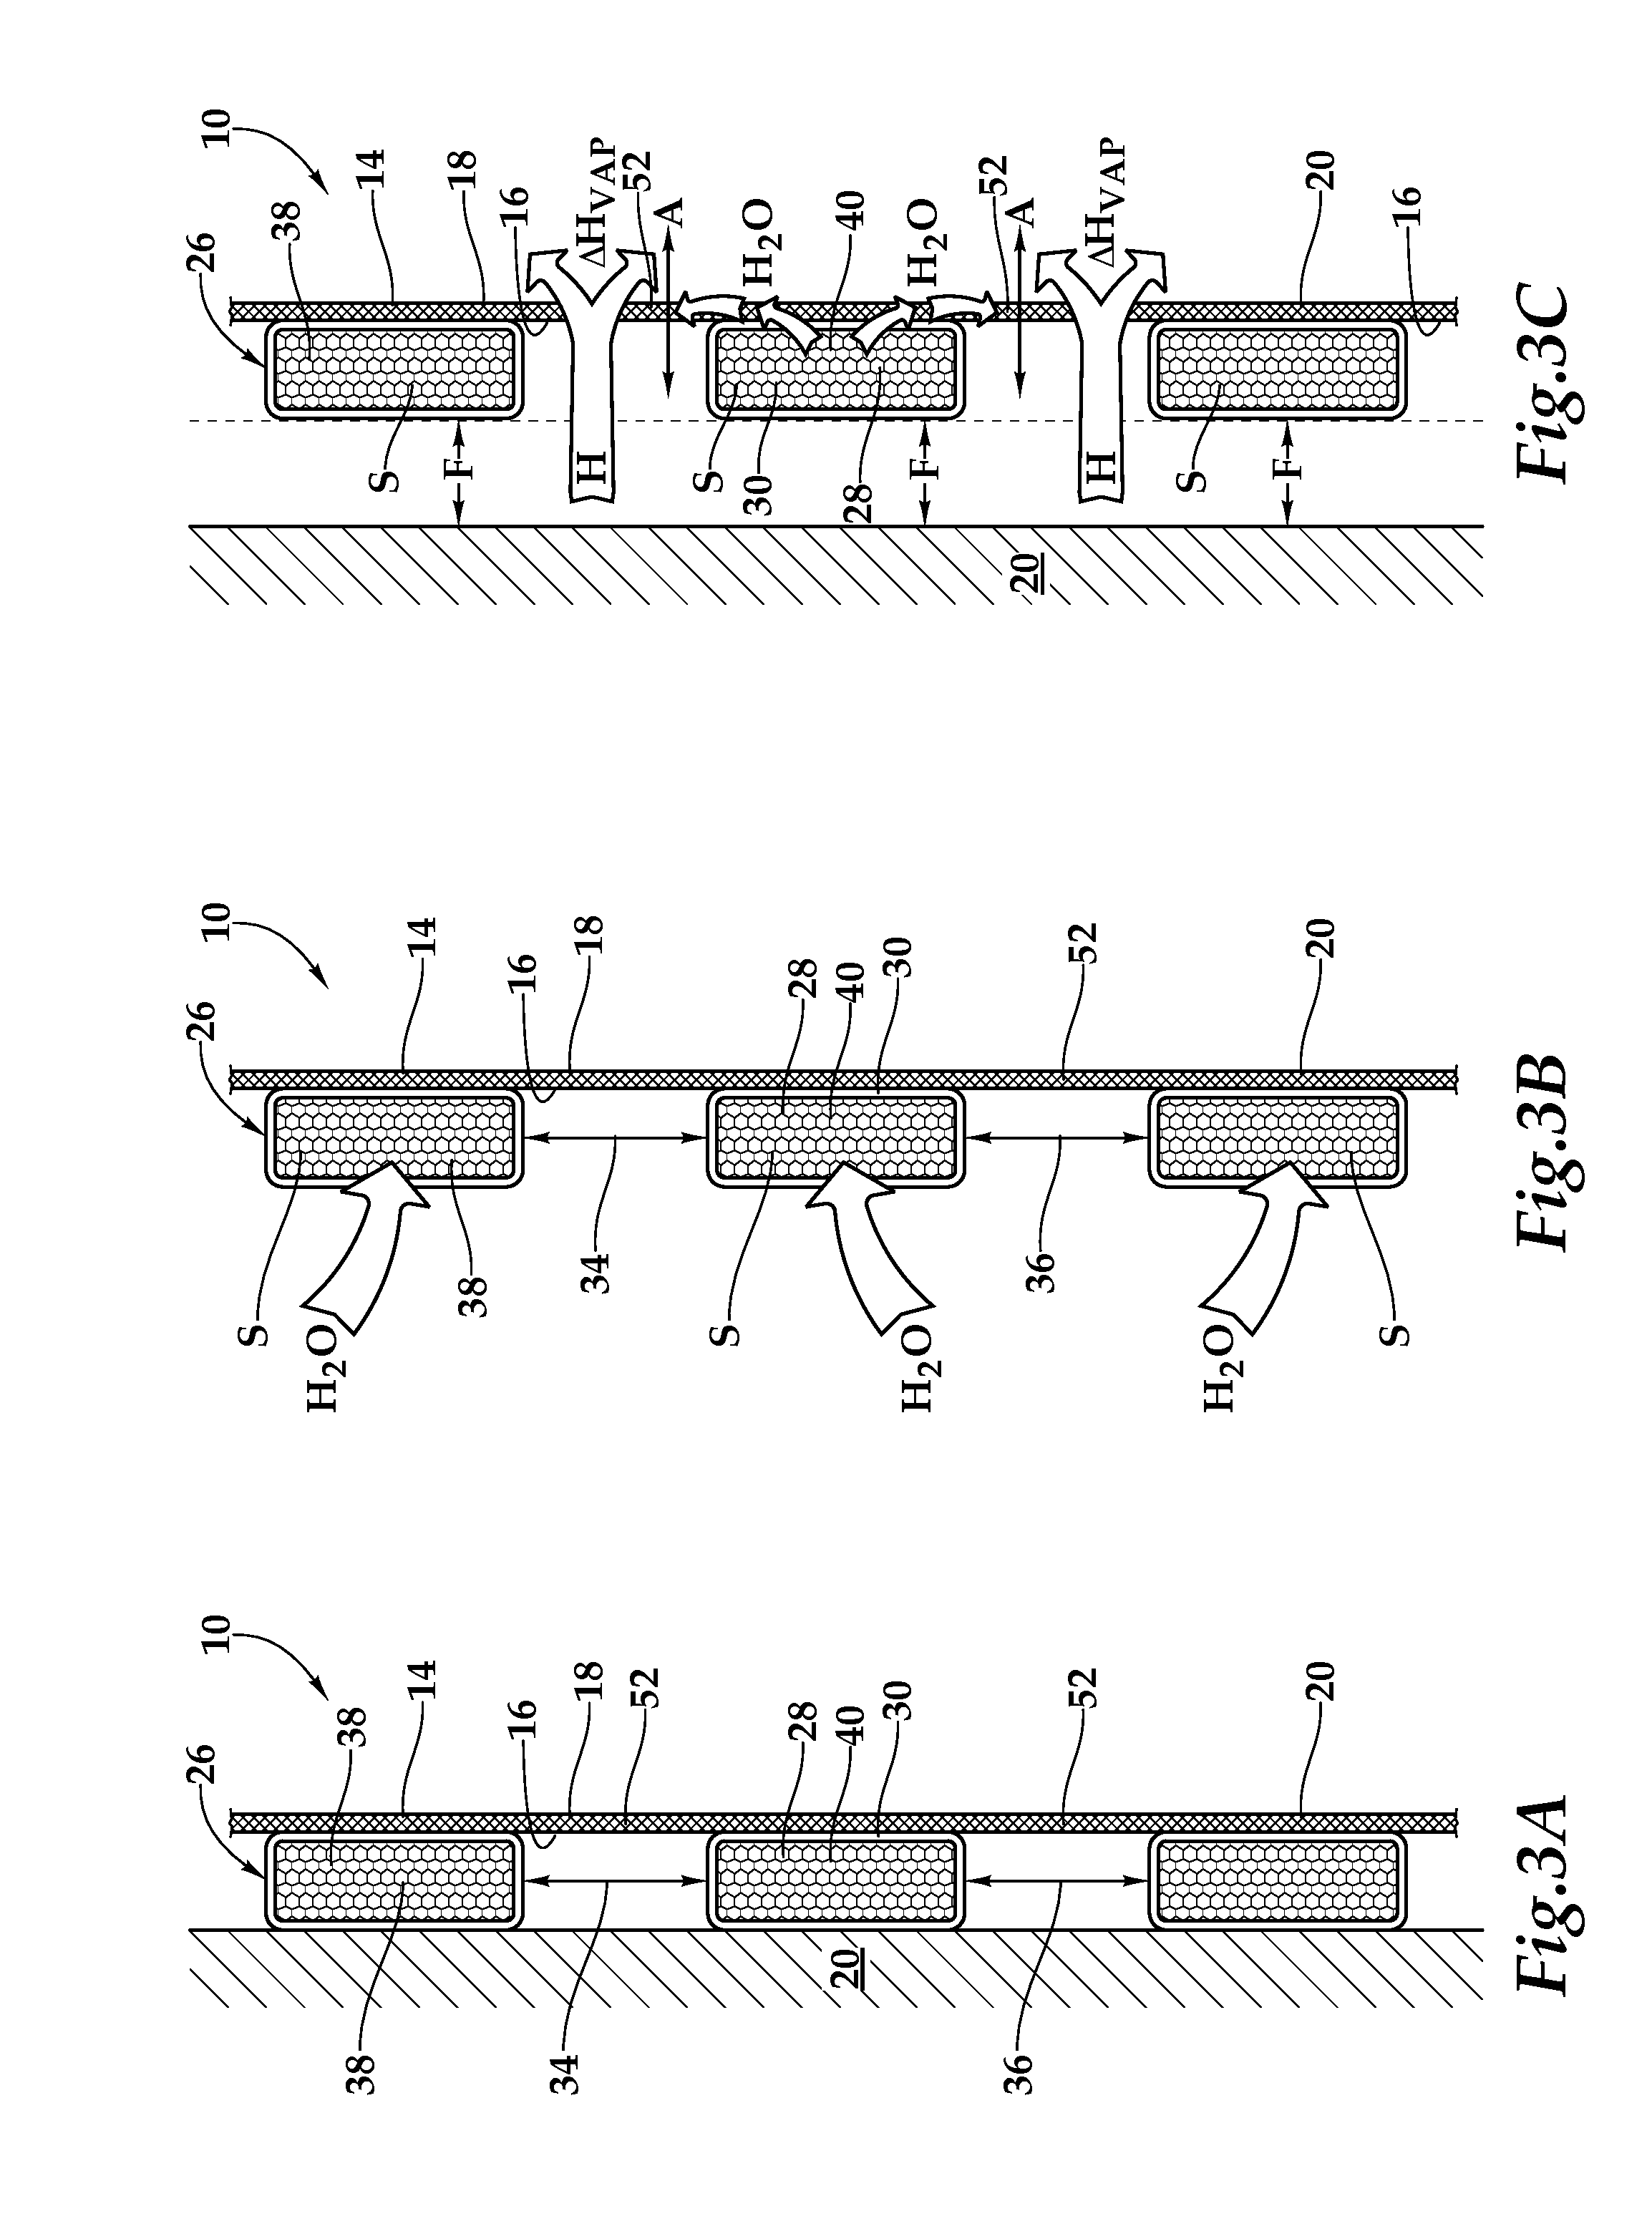 Cooling Article of Clothing and Method of Use for Same